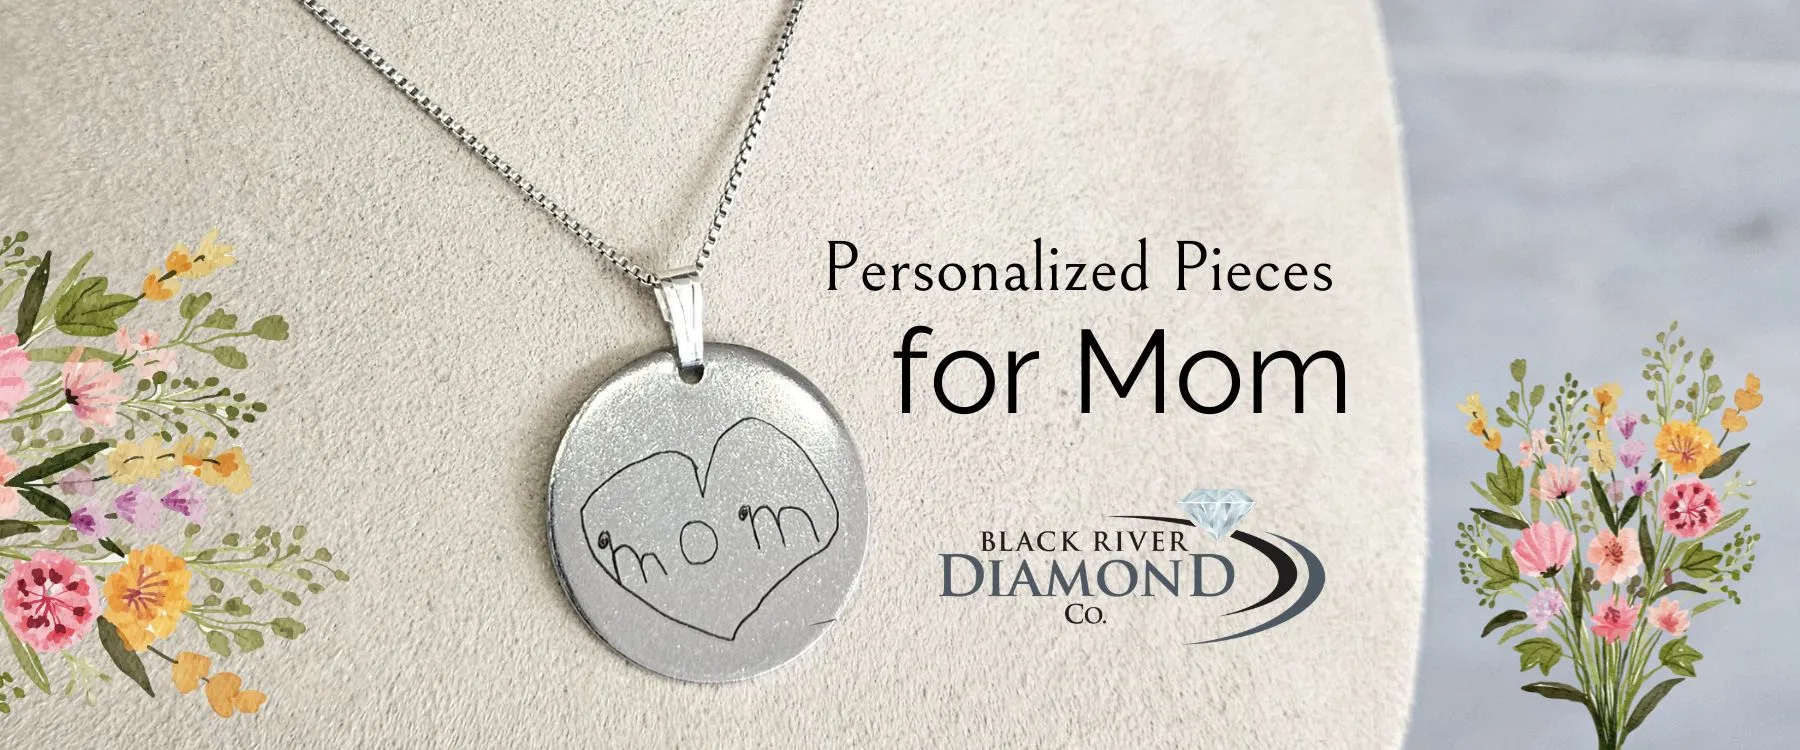 gift a precious moment in time with a laser engraving from Bay Area Diamond Company. Bay Area Diamond Company offers personalize